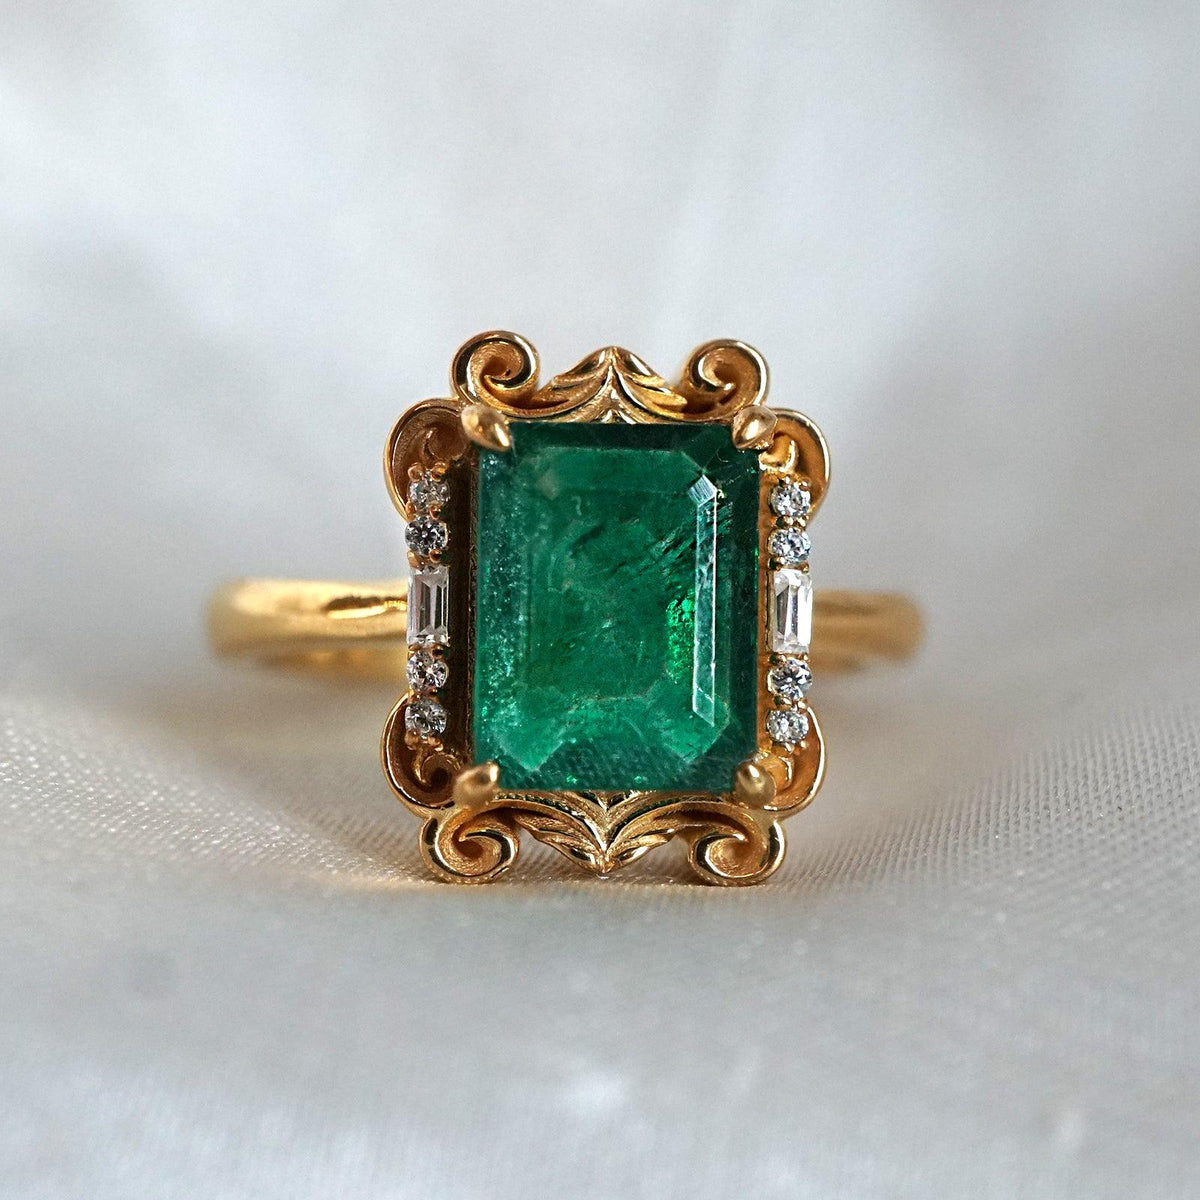 Isis Emerald Scroll Diamond Ring in 14K and 18K Gold - Tippy Taste Jewelry